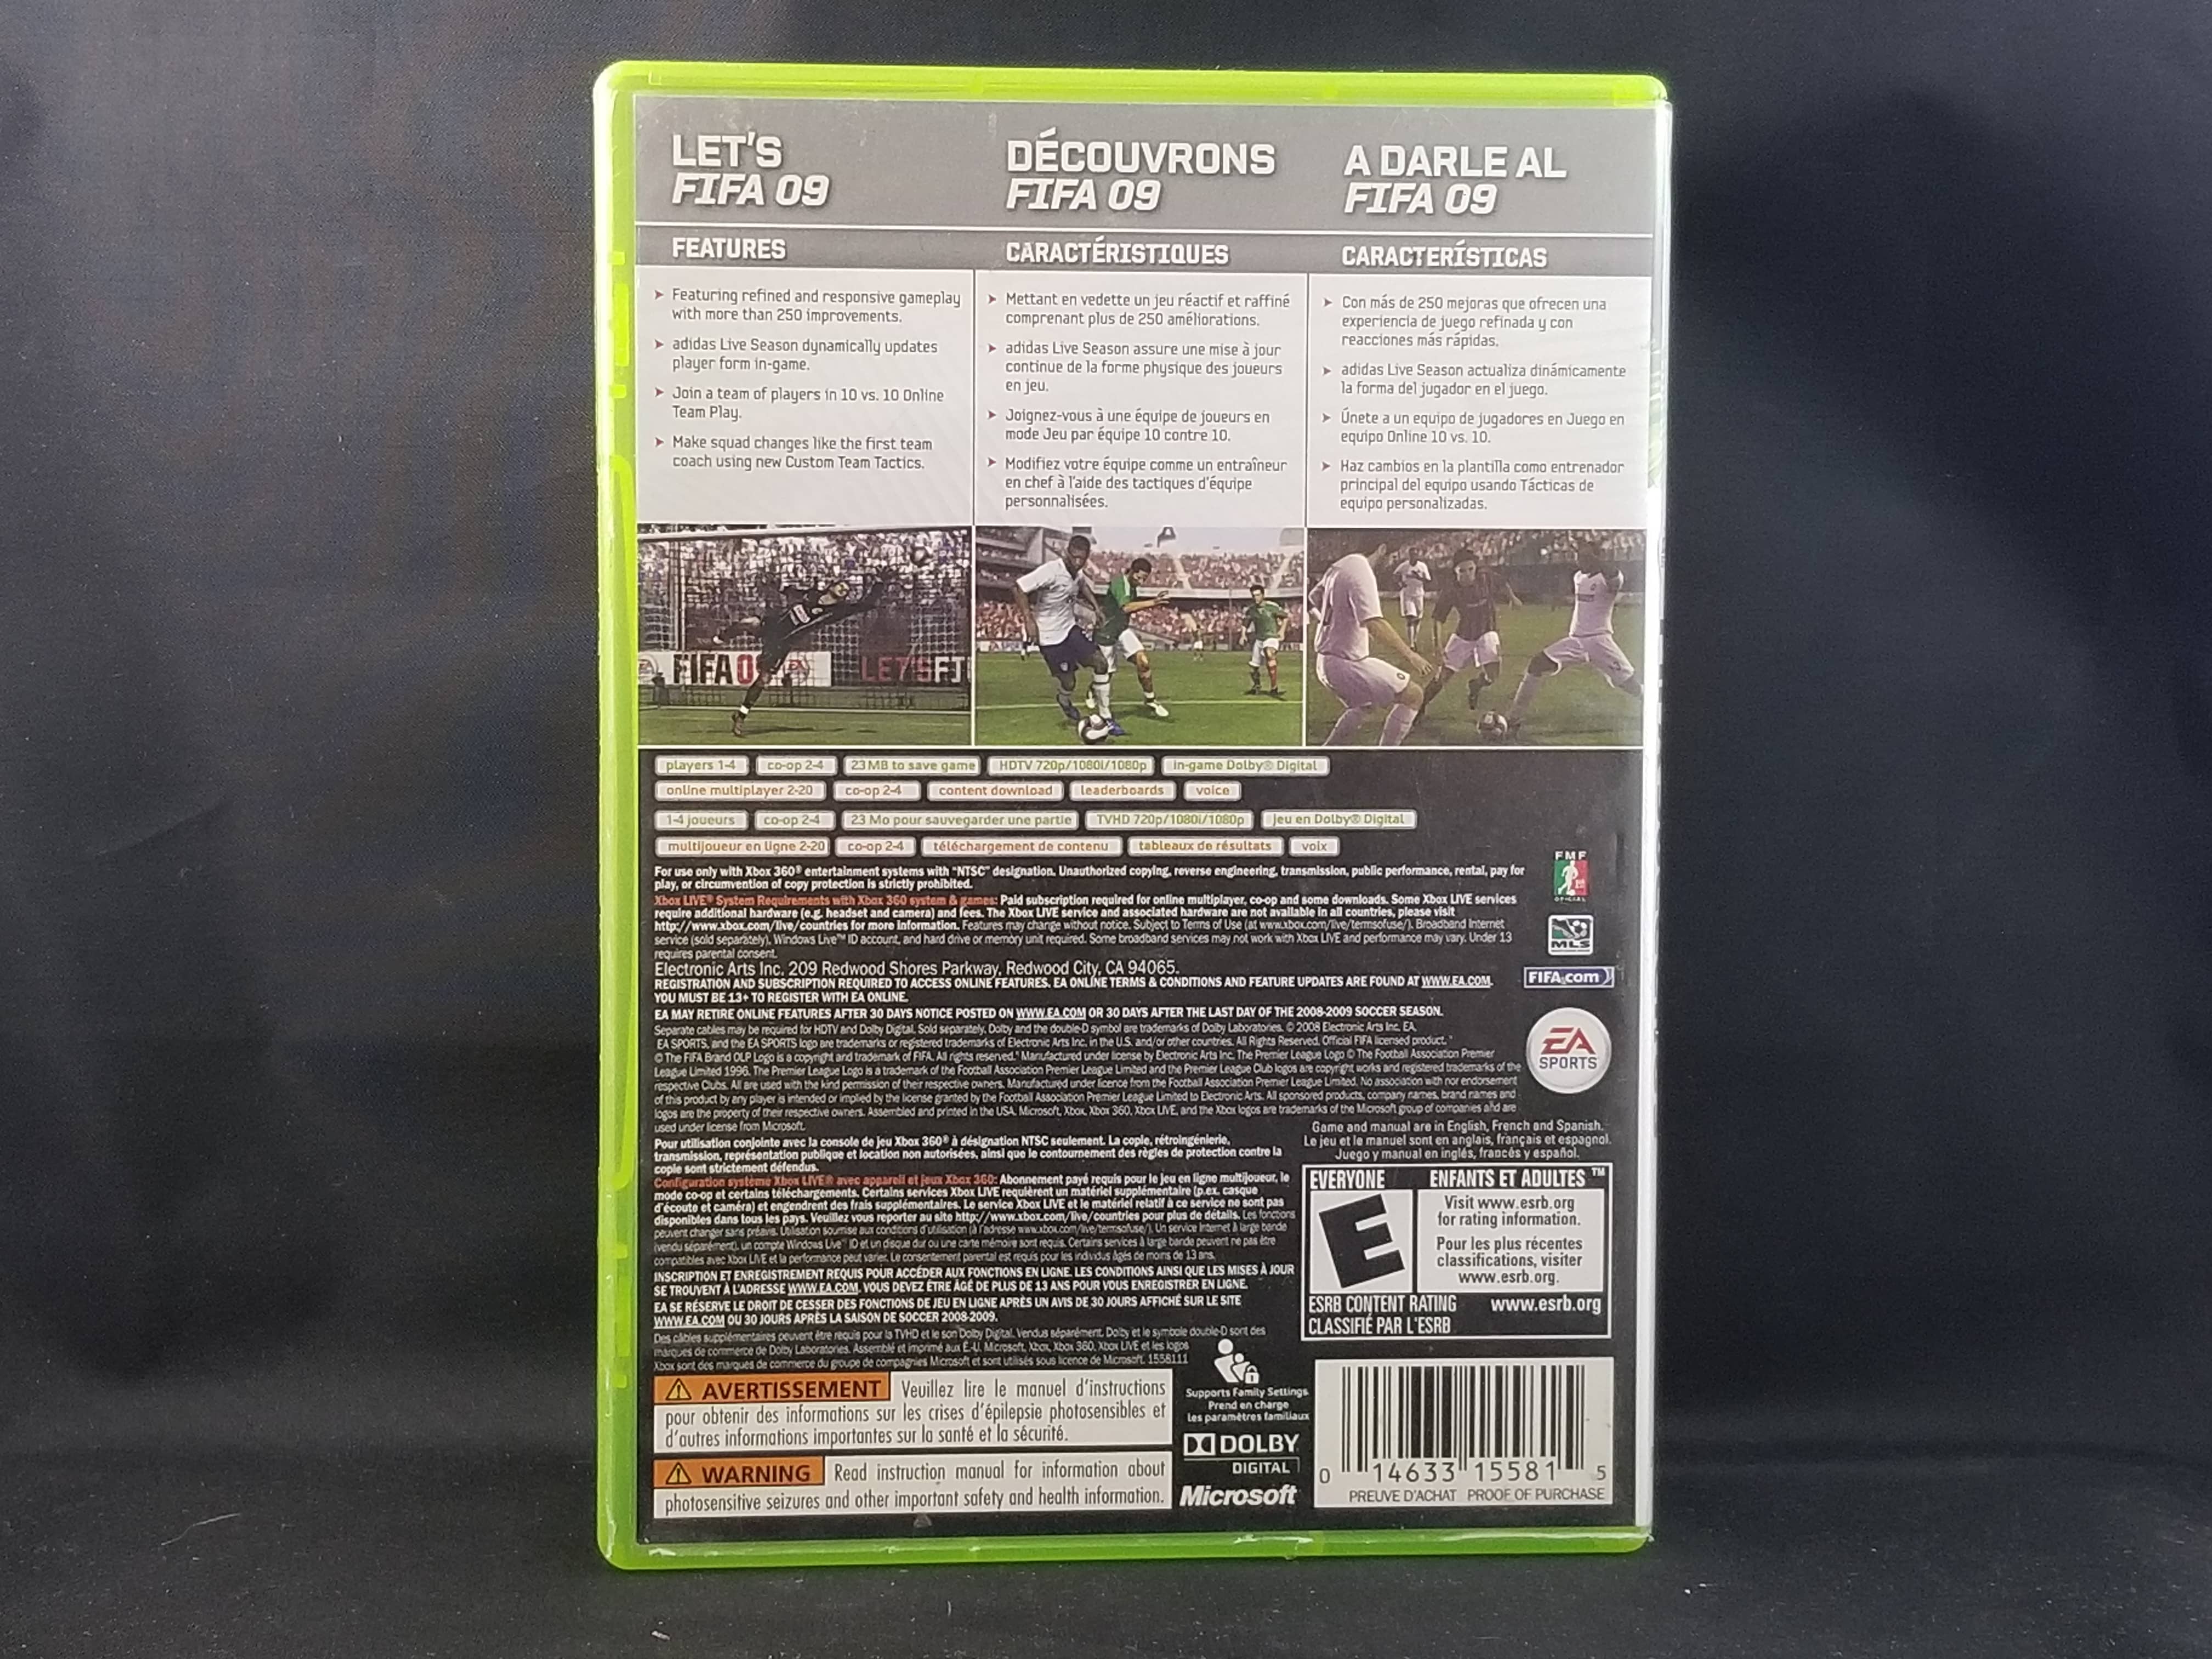 FIFA SOCCER 09 XBOX 360 XBOX LIVE GAME WITH CASE**